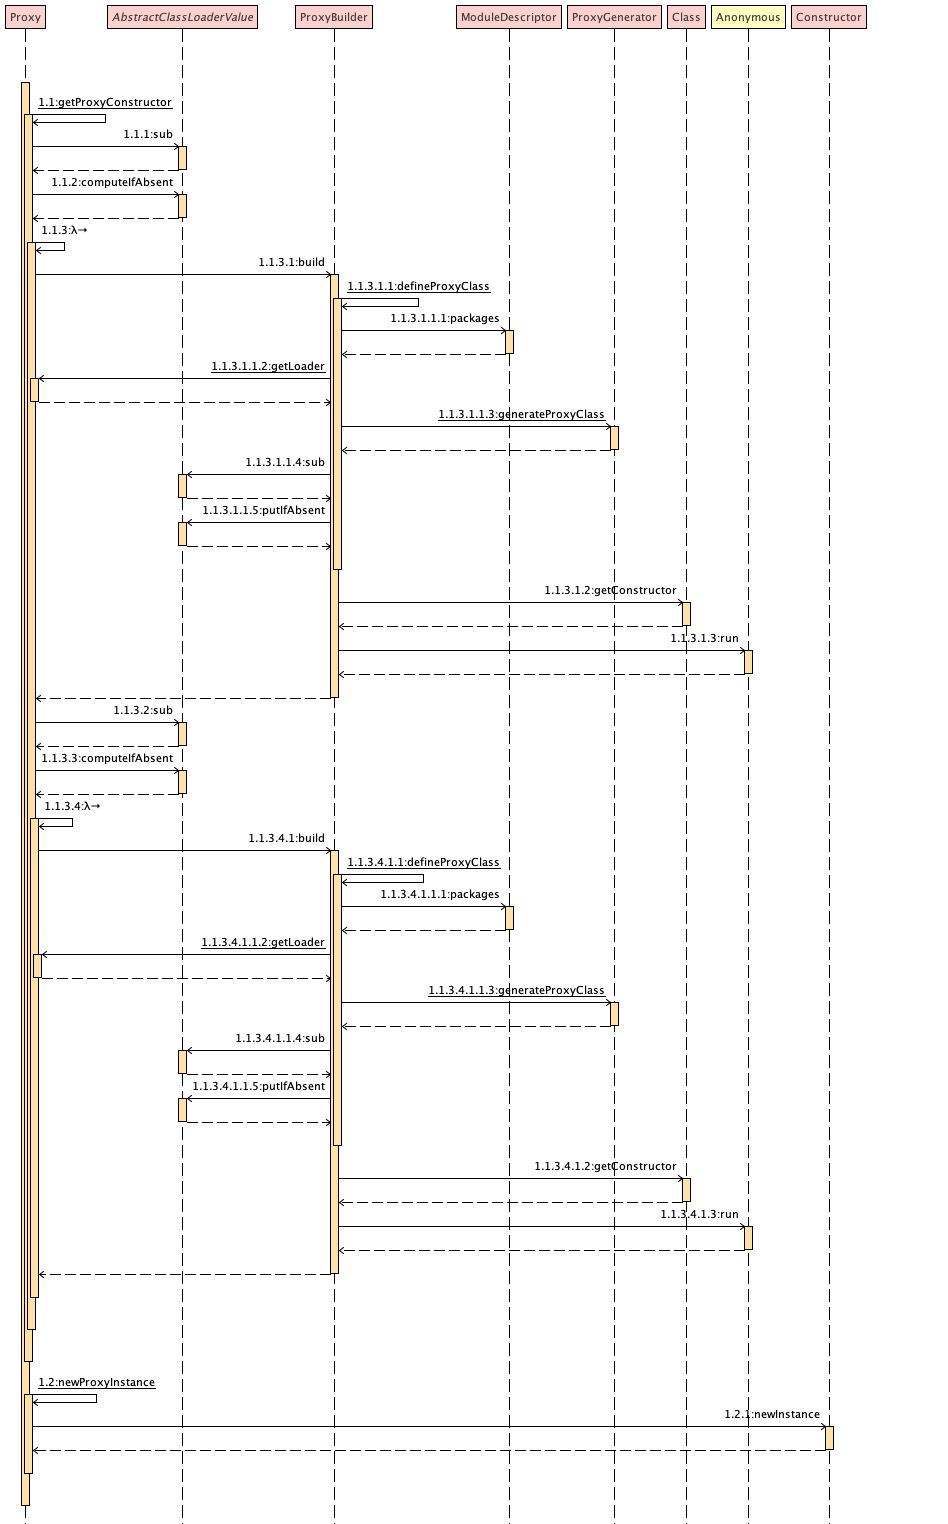 Proxy newProxyInstance sequence diagram